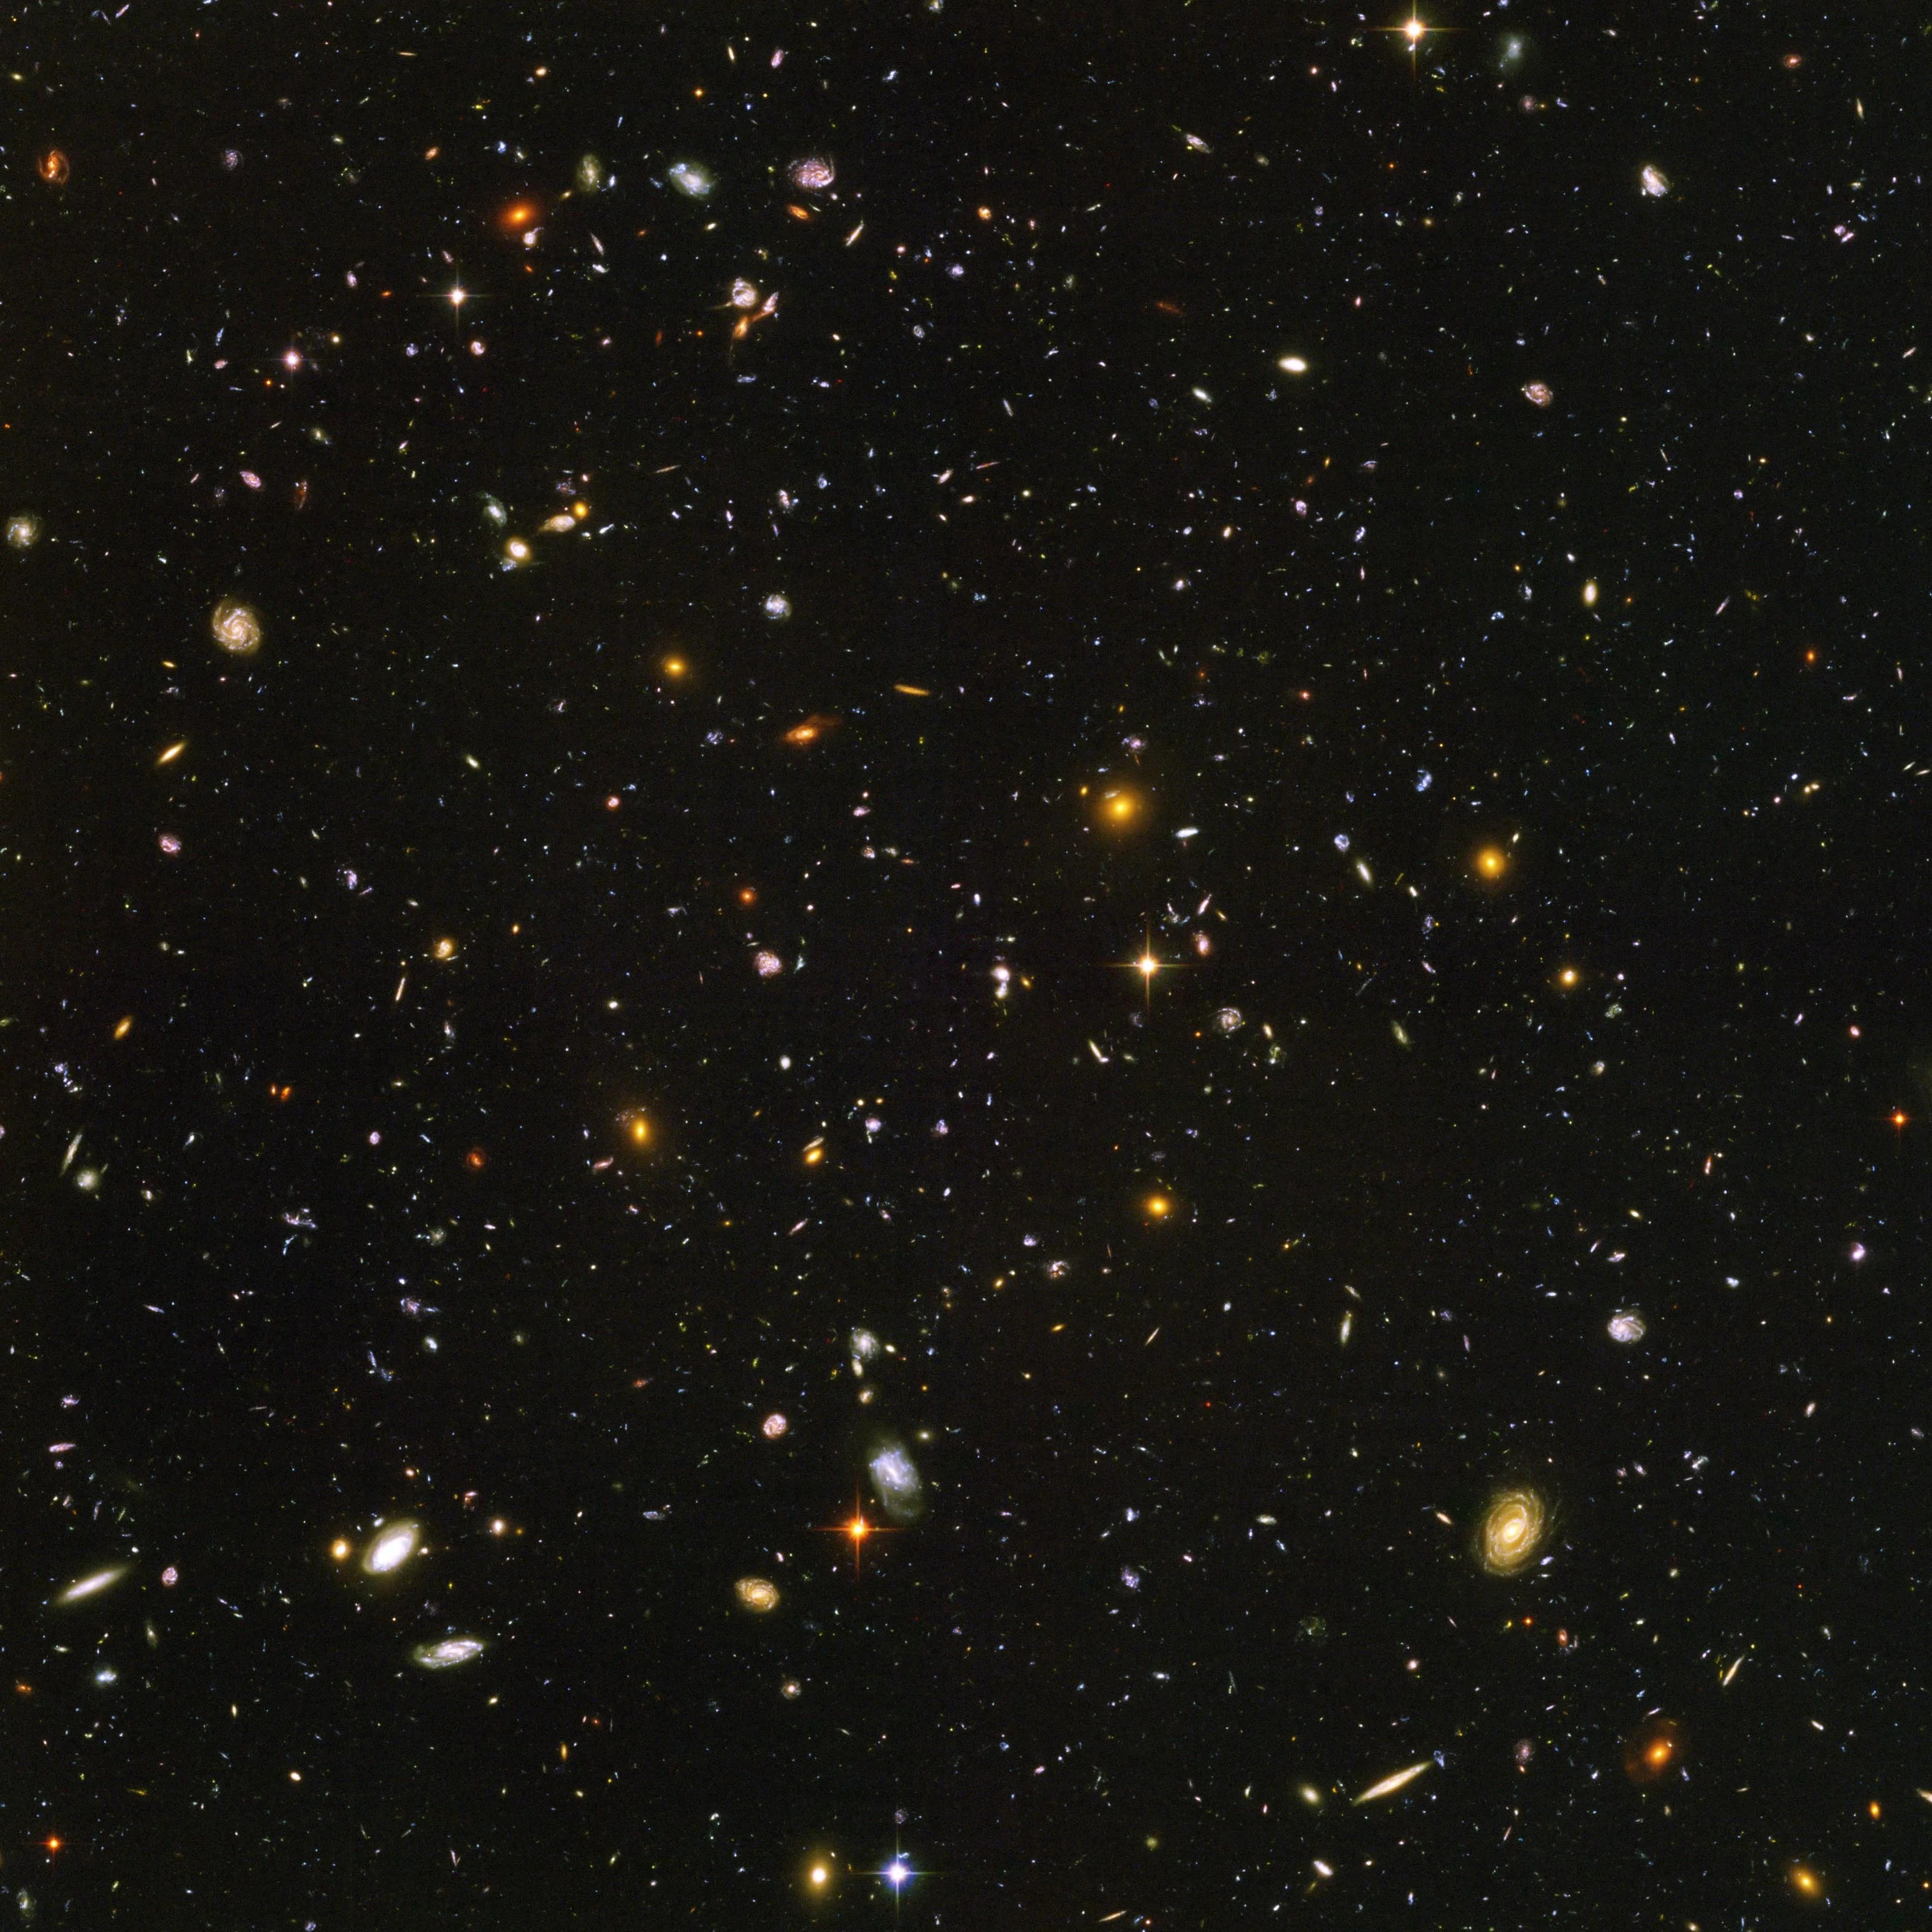 A myriad of colorful galaxies, in all shapes, sizes, and forms, dot the image.